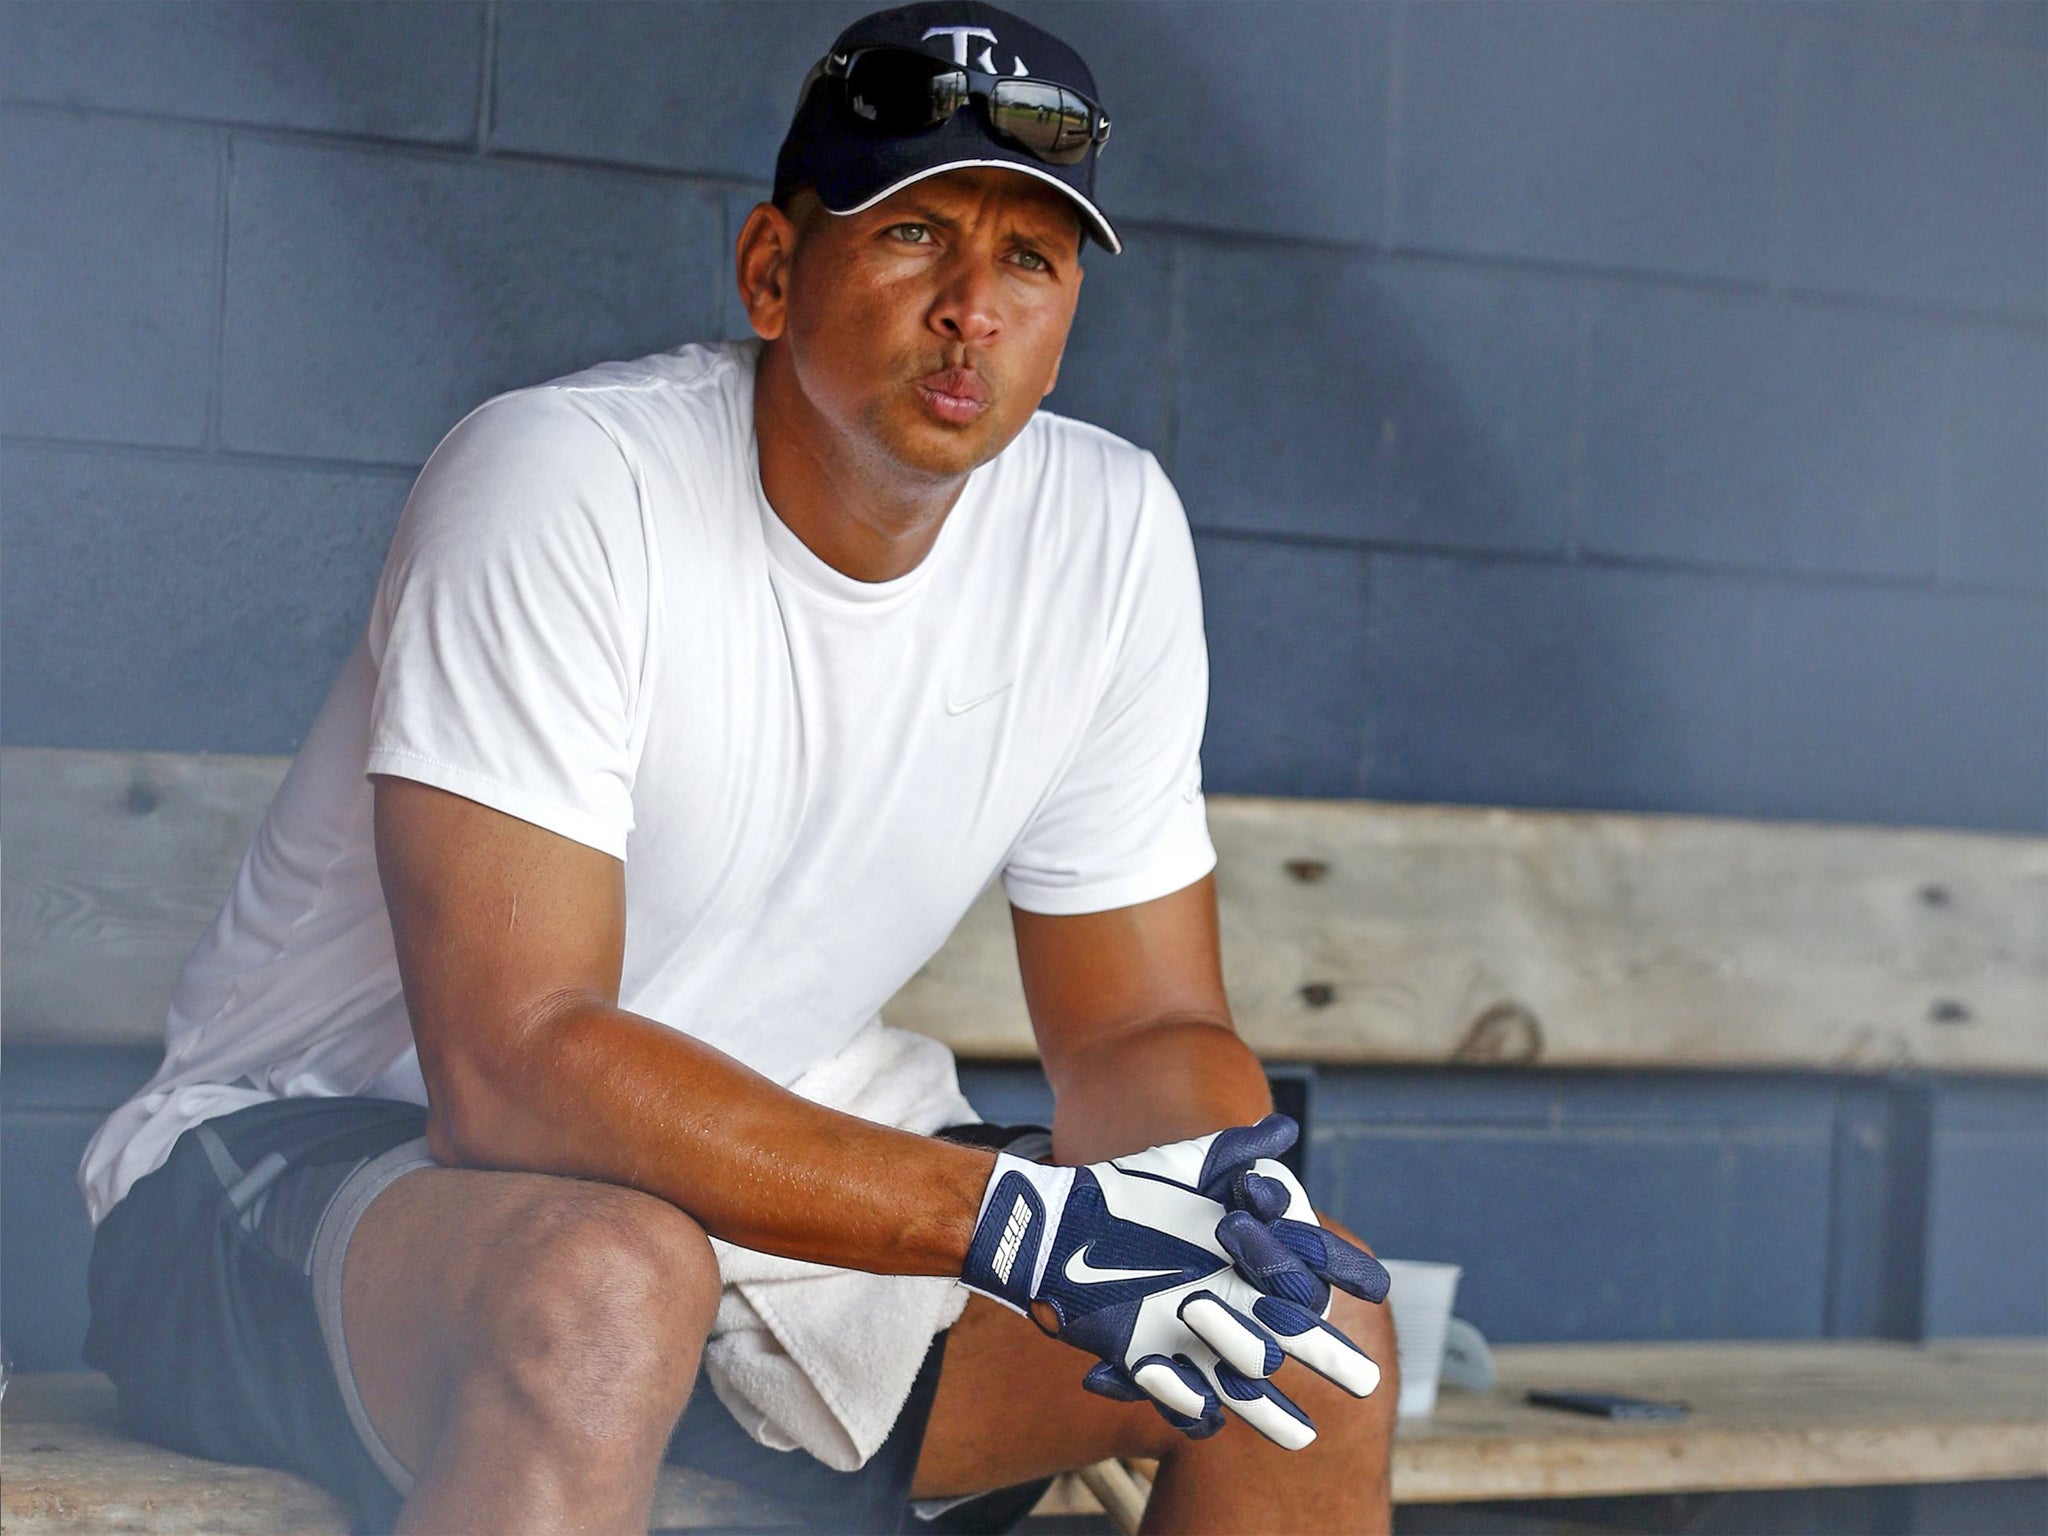 Alex Rodriguez missed the whole of the 2014 season for doping